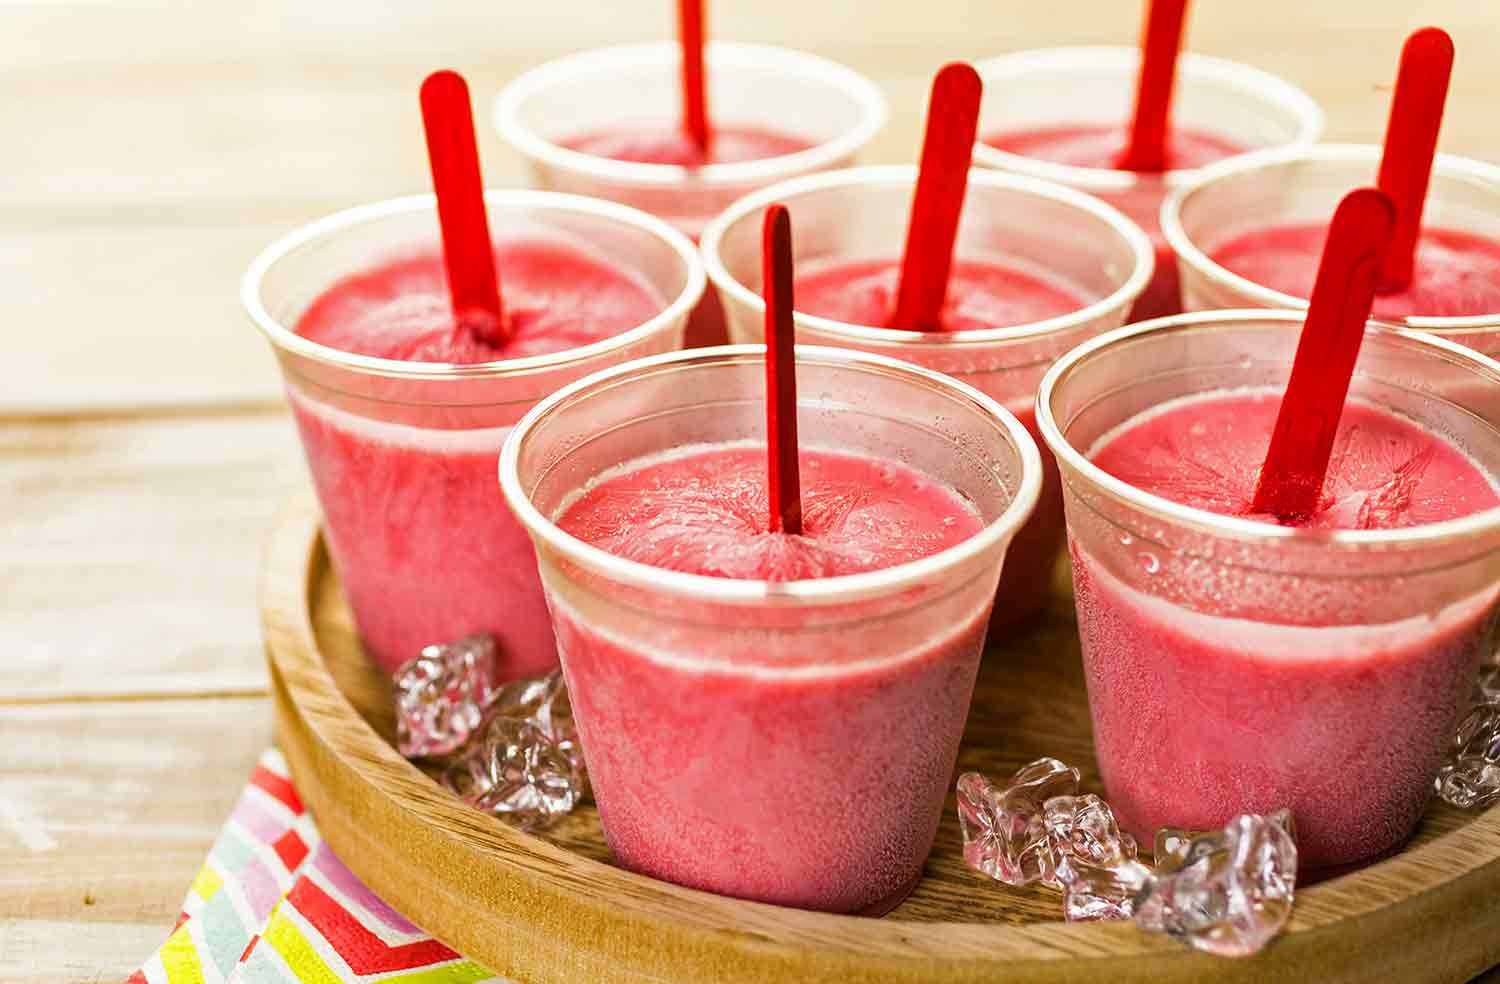 Pink frozen substance in plastic cups, each with a stick.